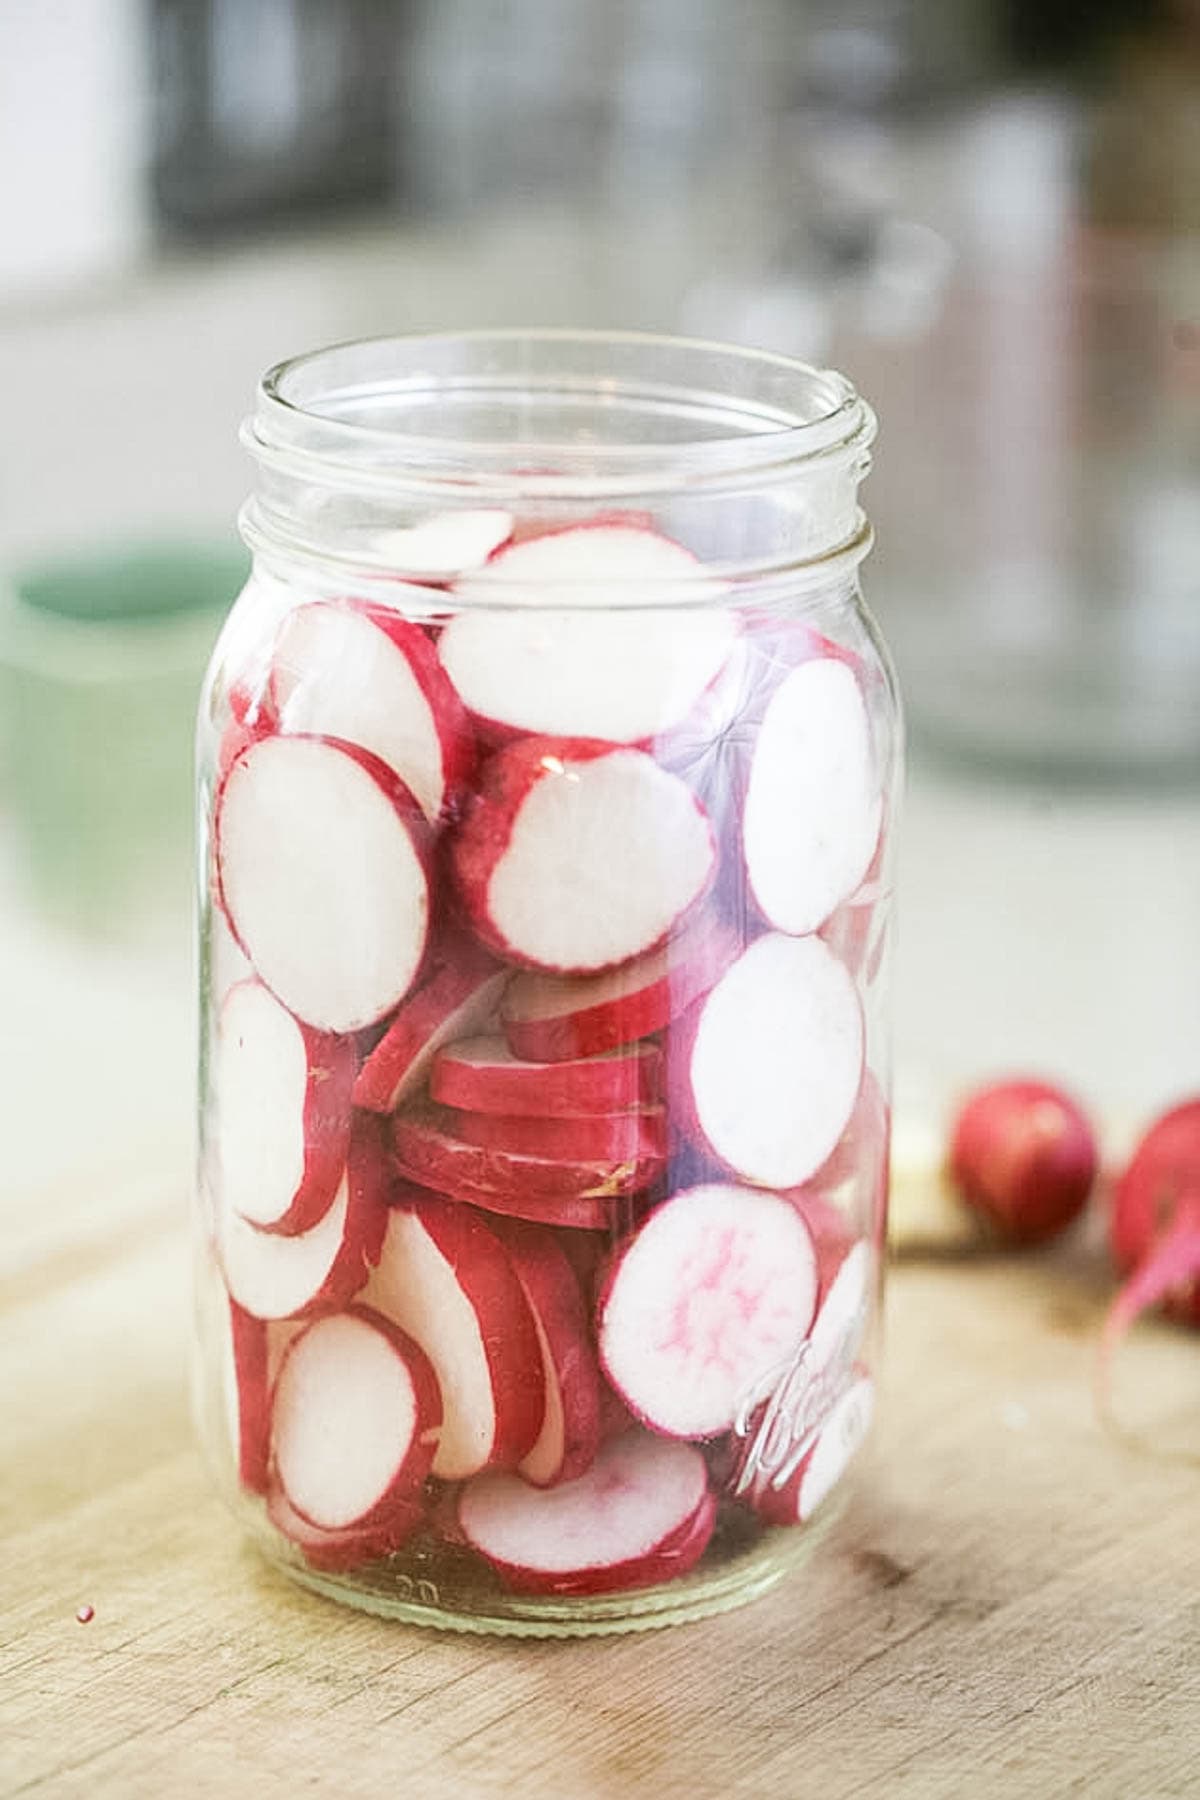 Packing the jar with radishes.